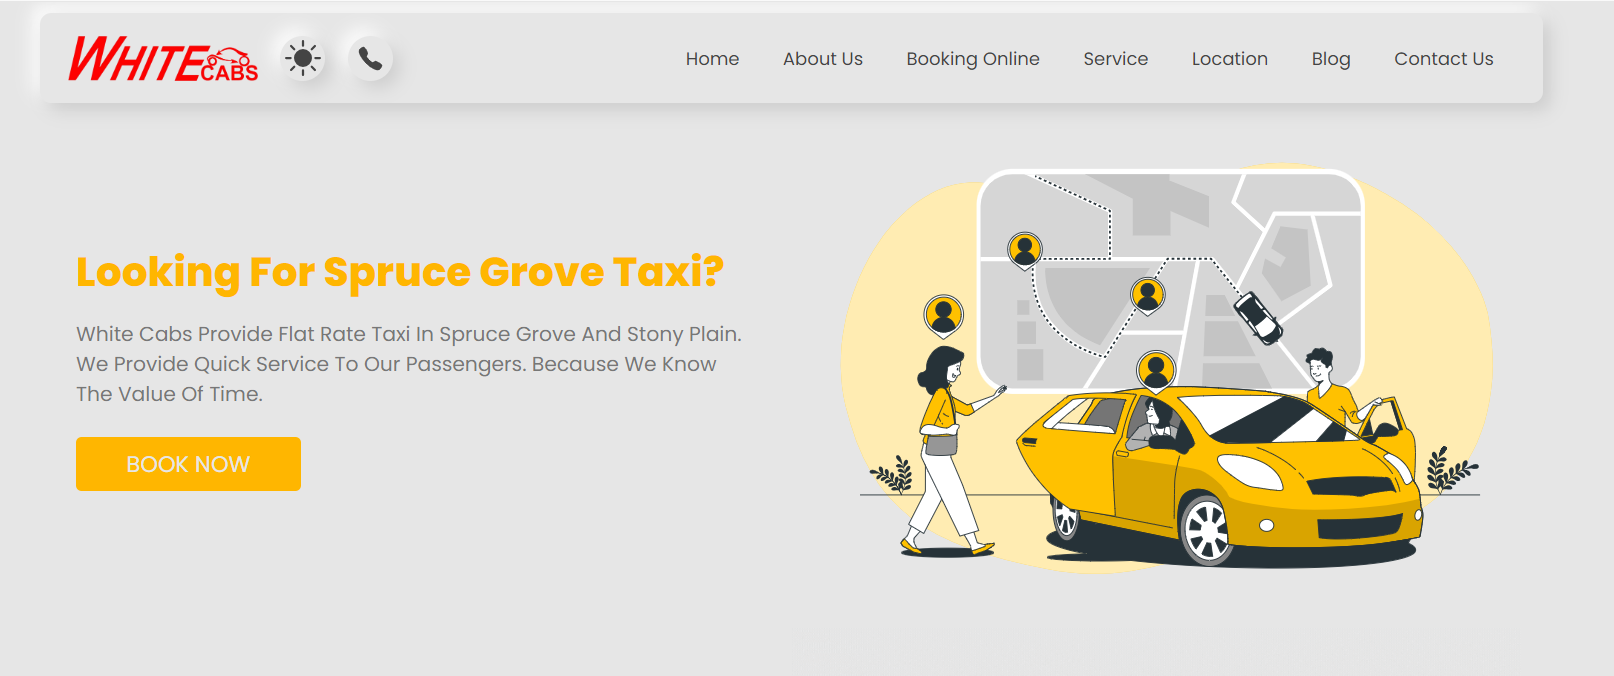 White Cab - Driving Local Lead Generation and Revenue